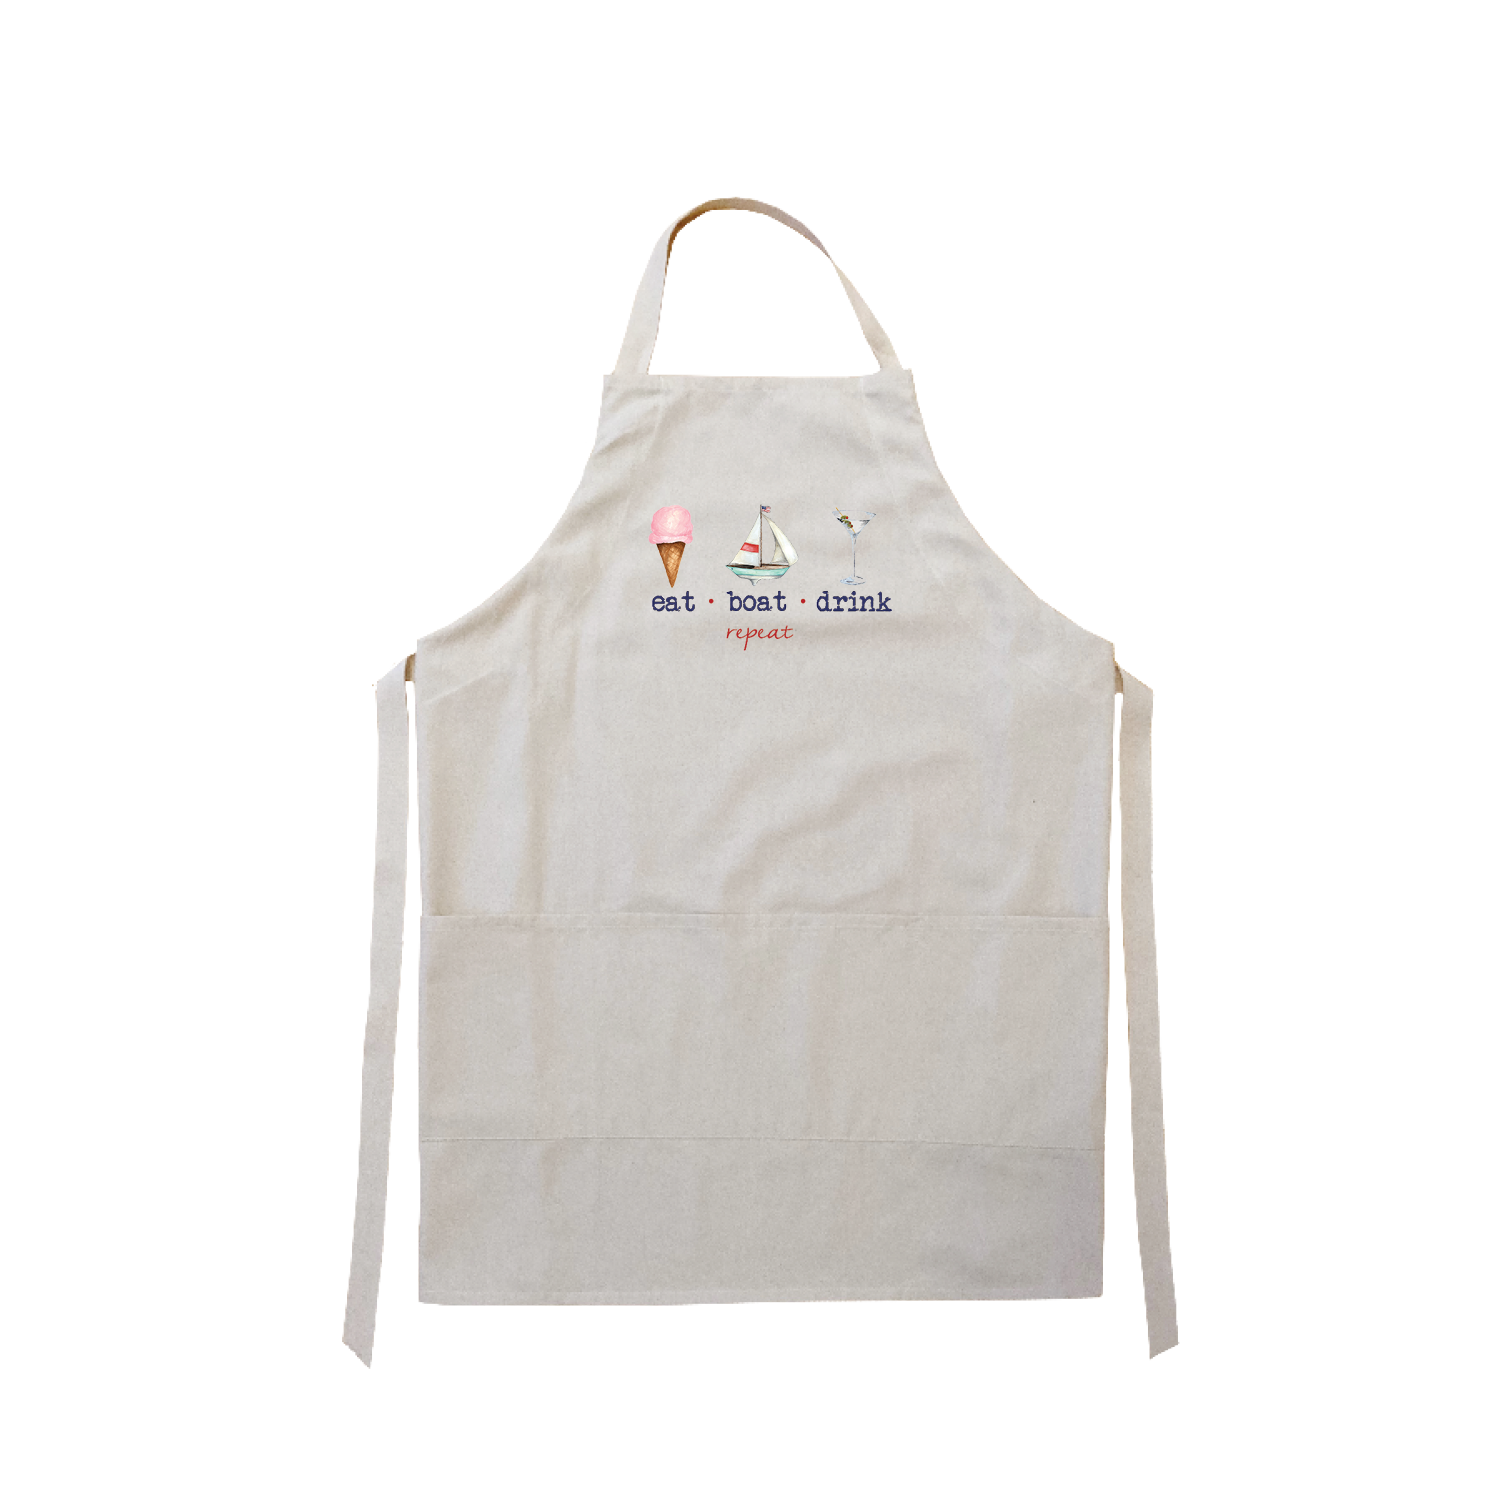 eat boat drink repeat apron